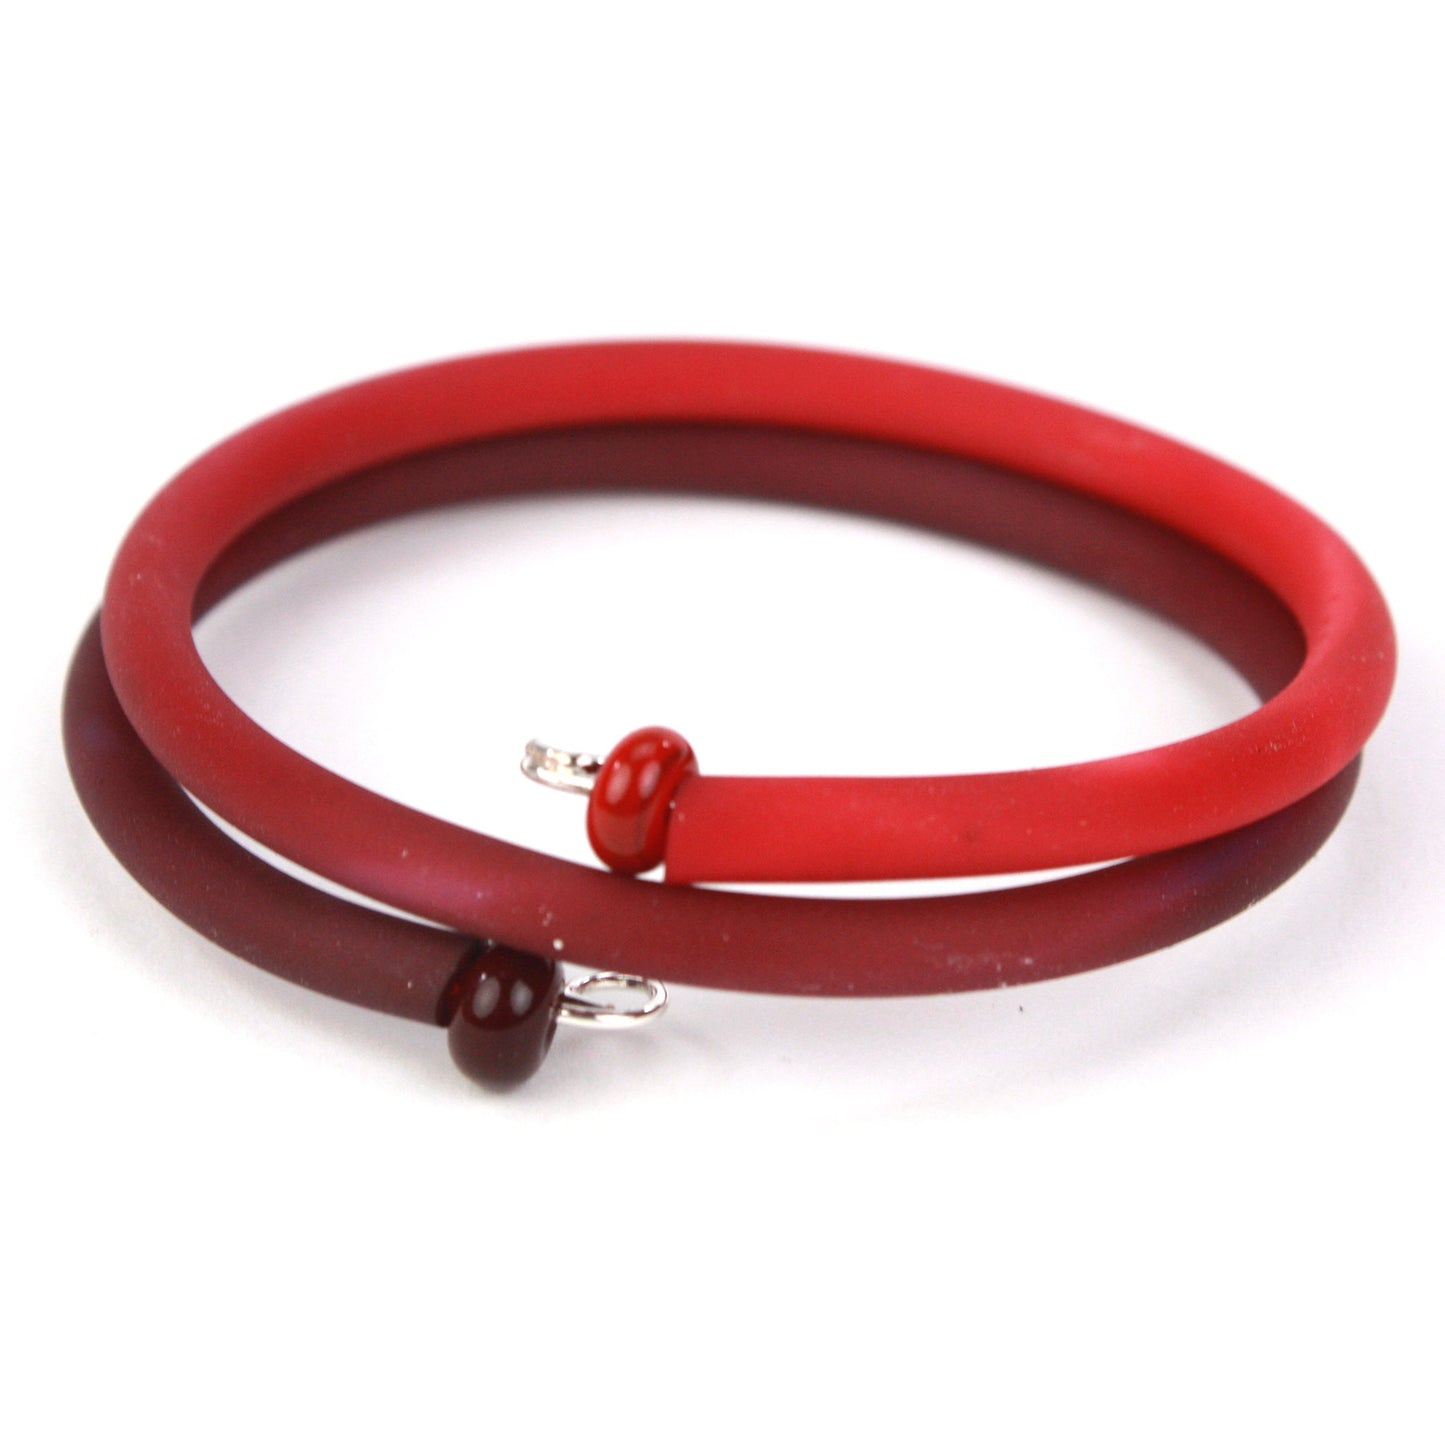 Double wrap bracelet - Dark red and light red